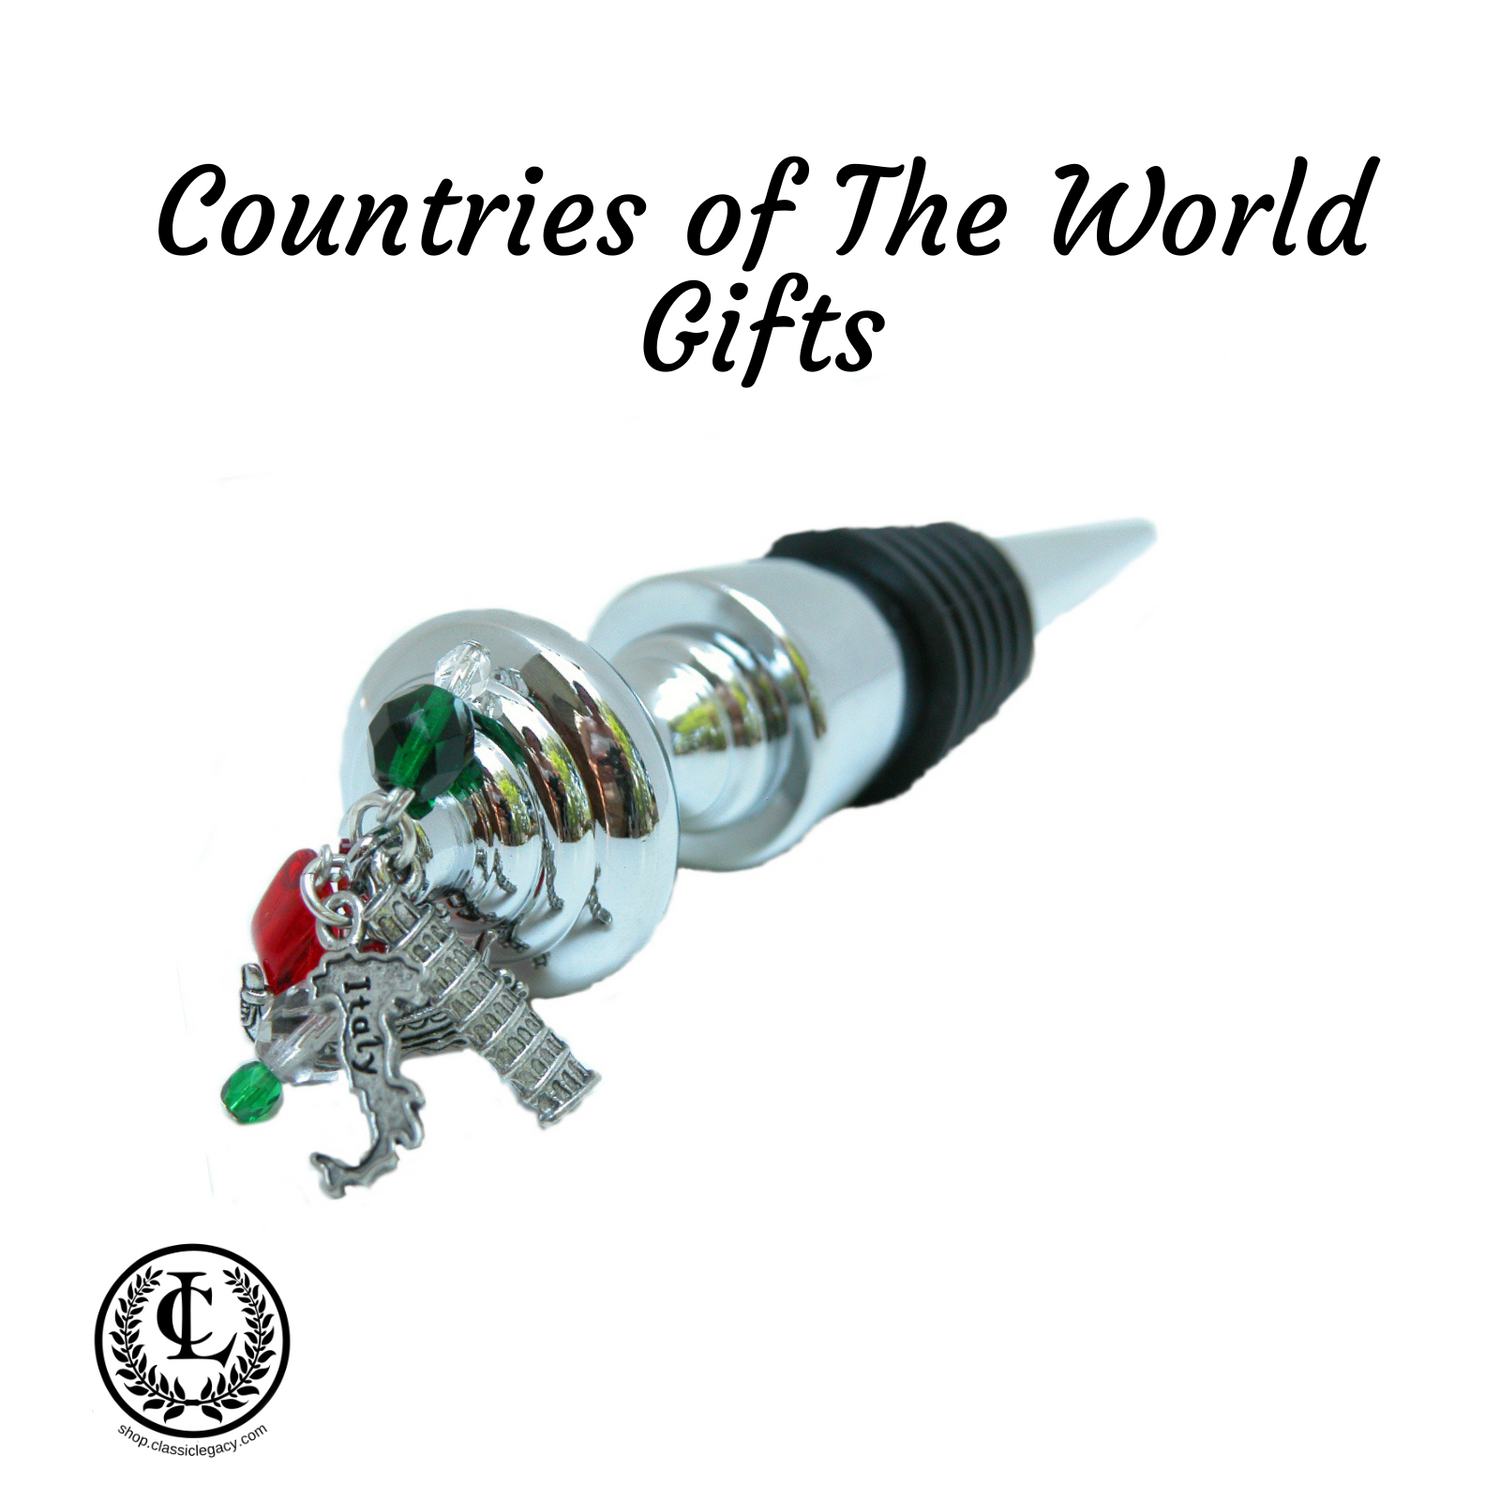 Countries of the World Gifts